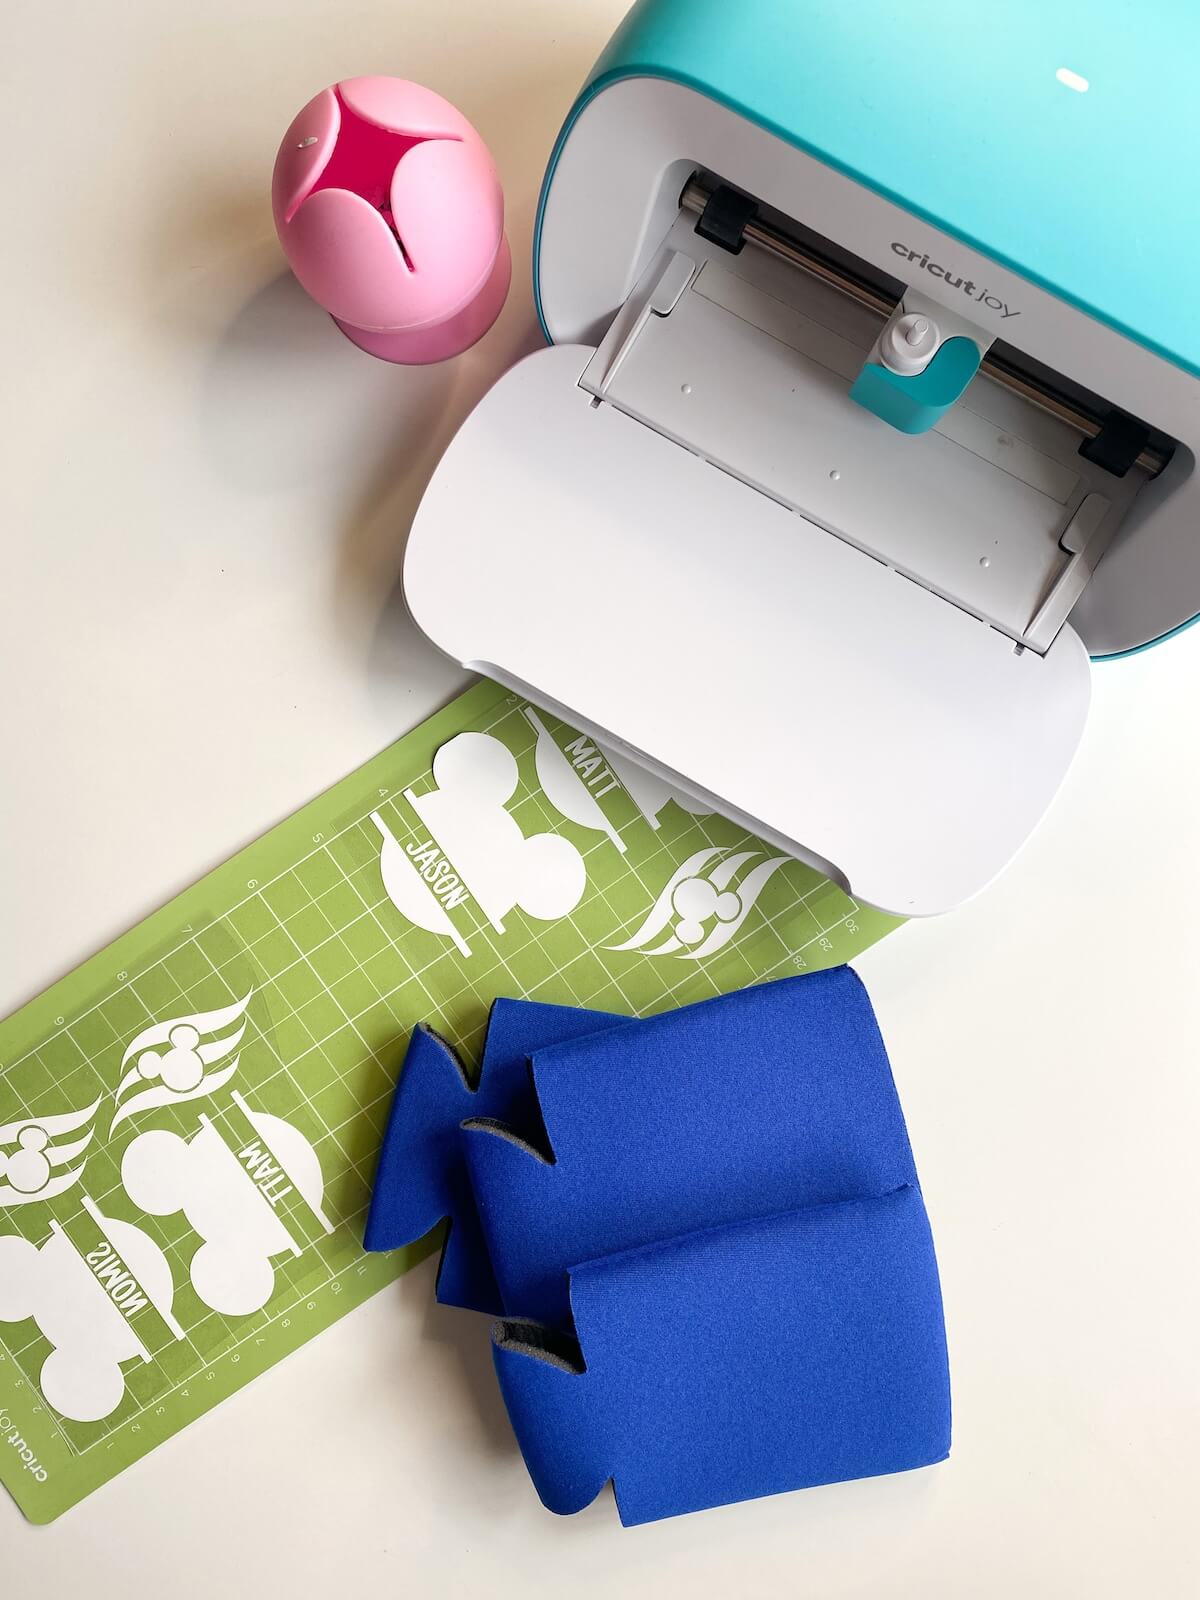 How to Make Cricut Can Koozies with Iron on Vinyl - Hey, Let's Make Stuff